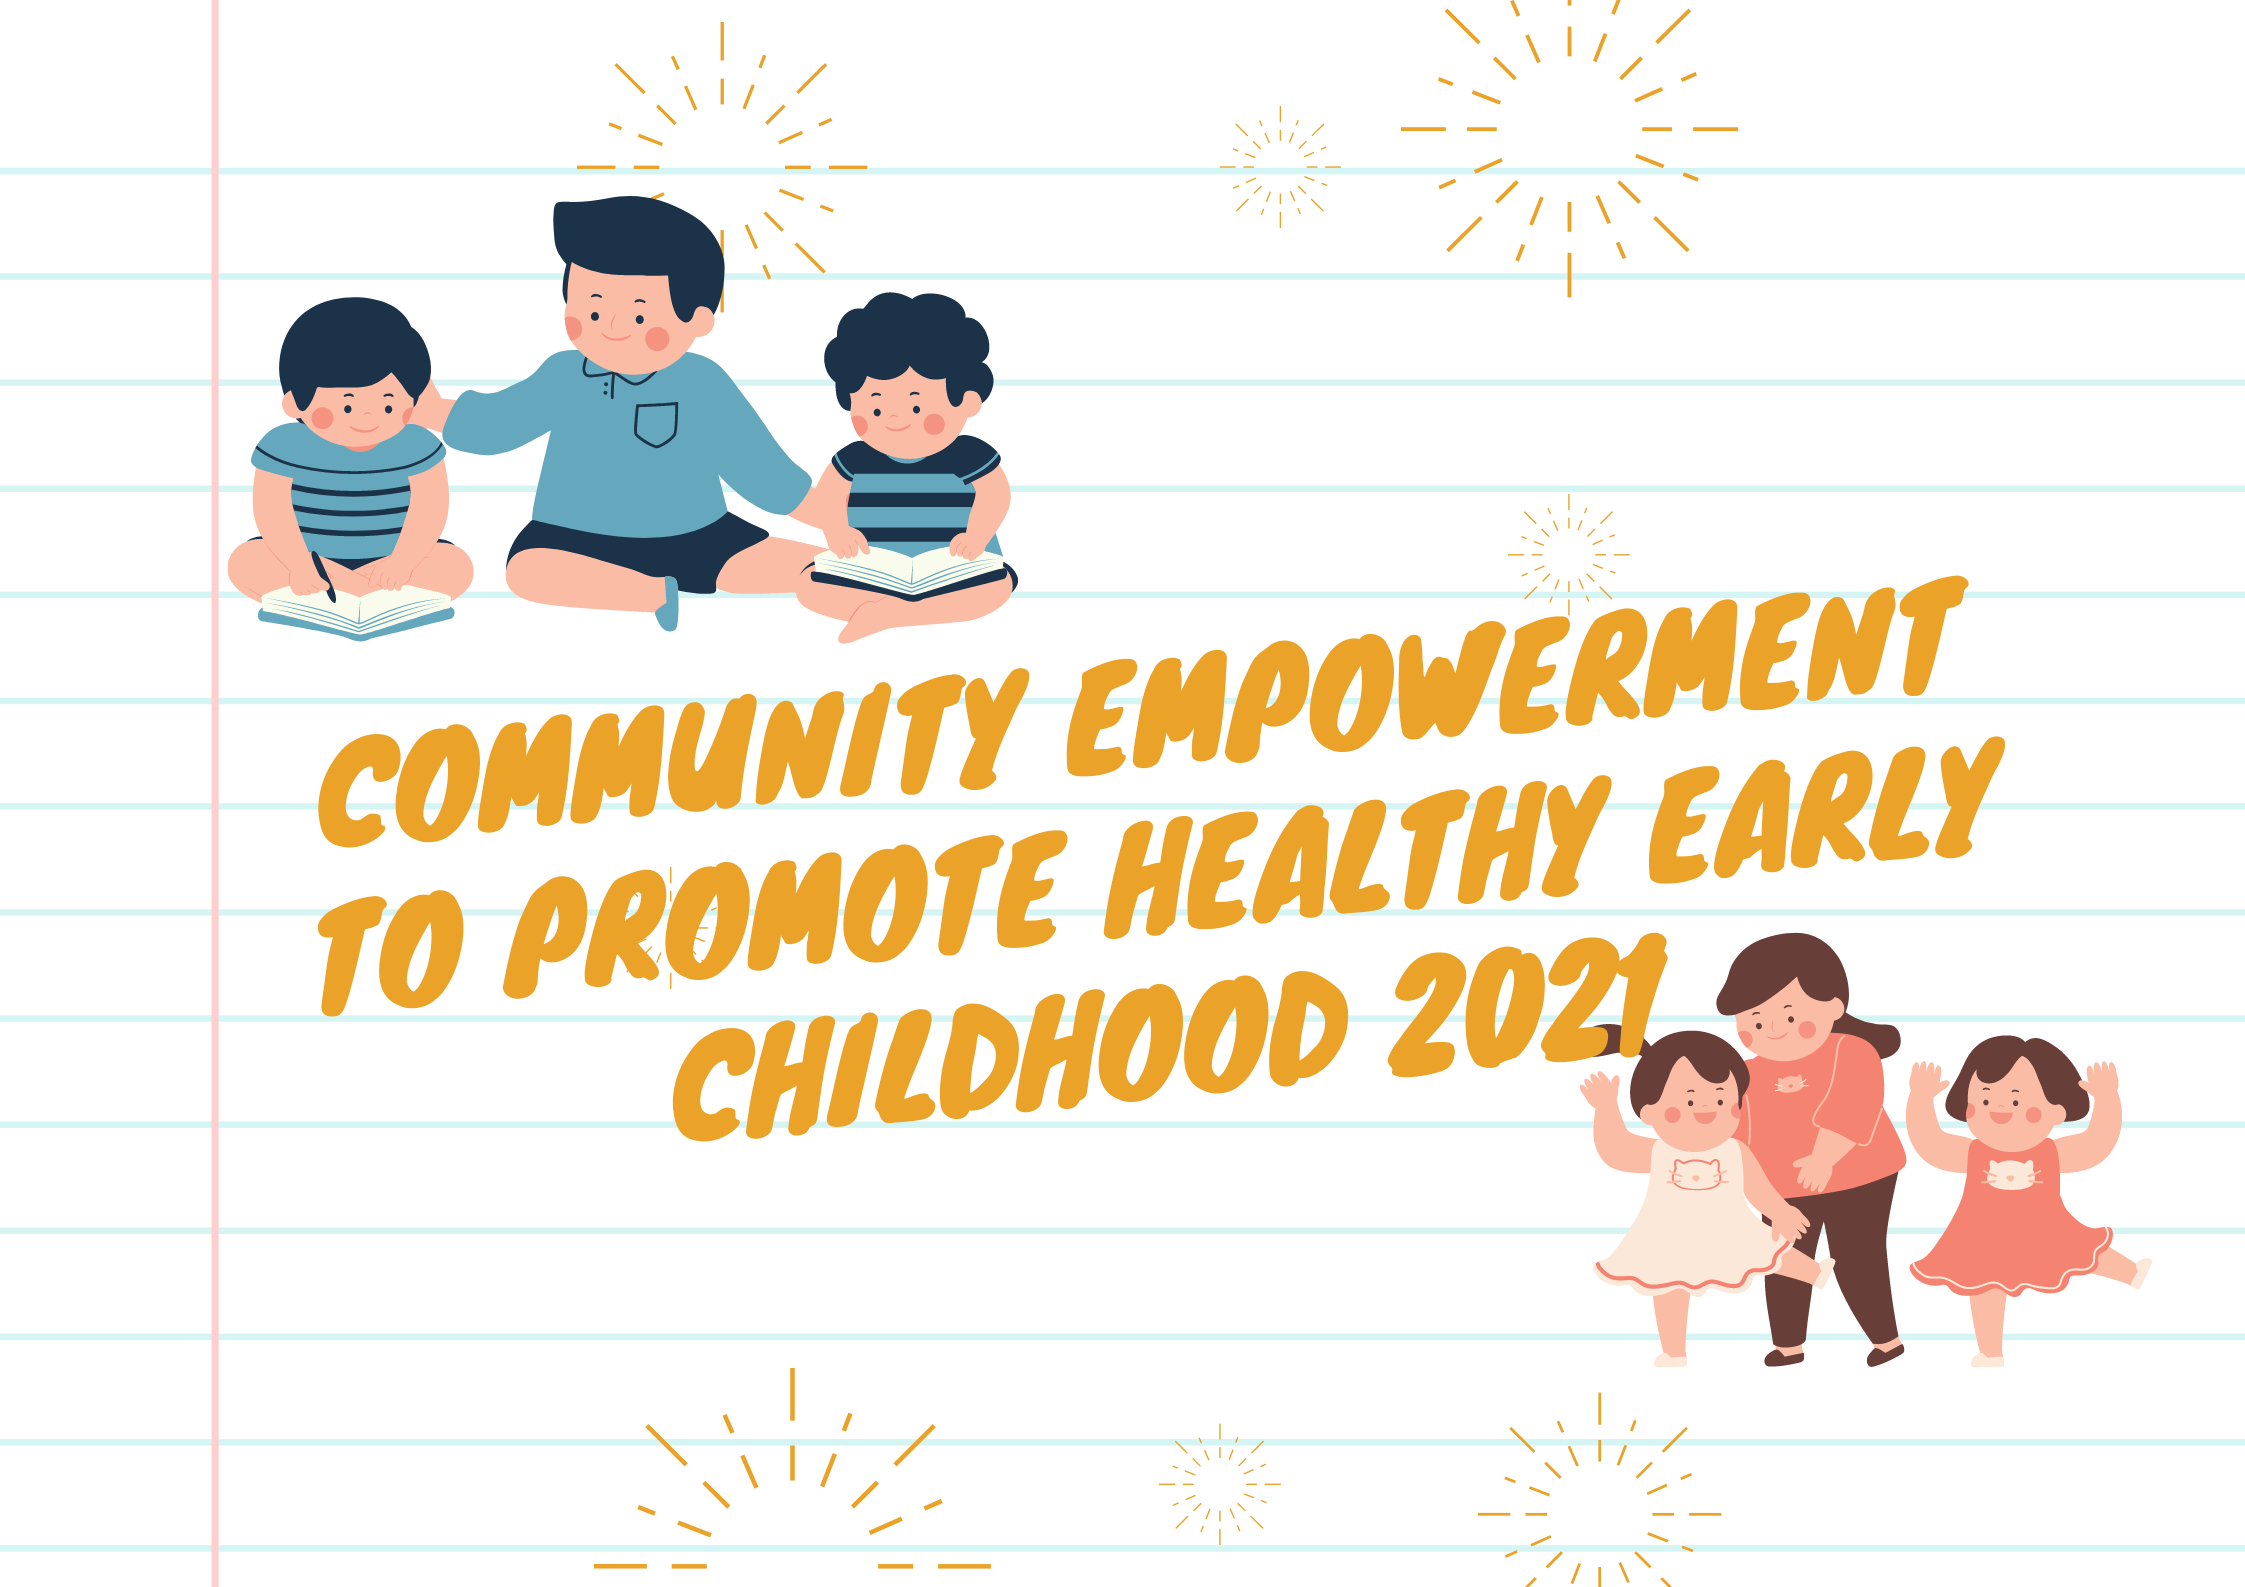 Community Empowerment to Promote Healthy Early Childhood 2021